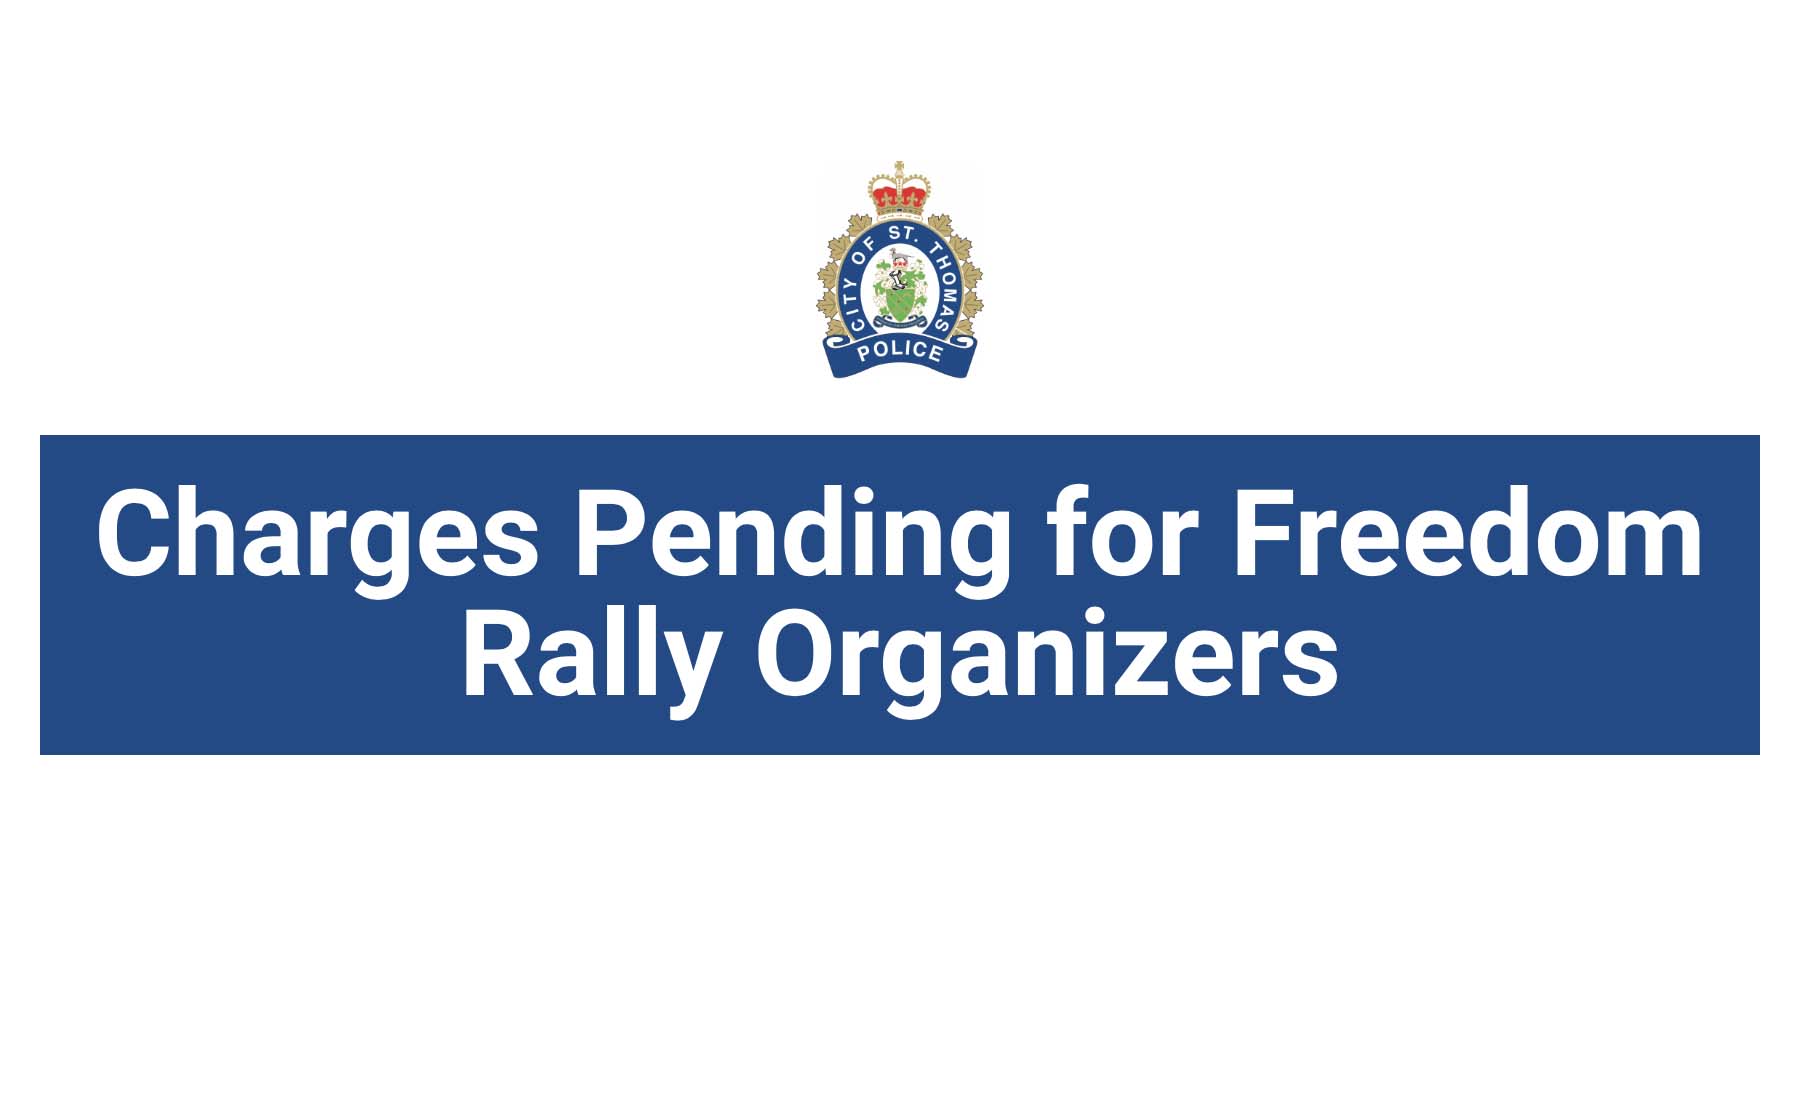 Charges Pending for Freedom Rally Organizers